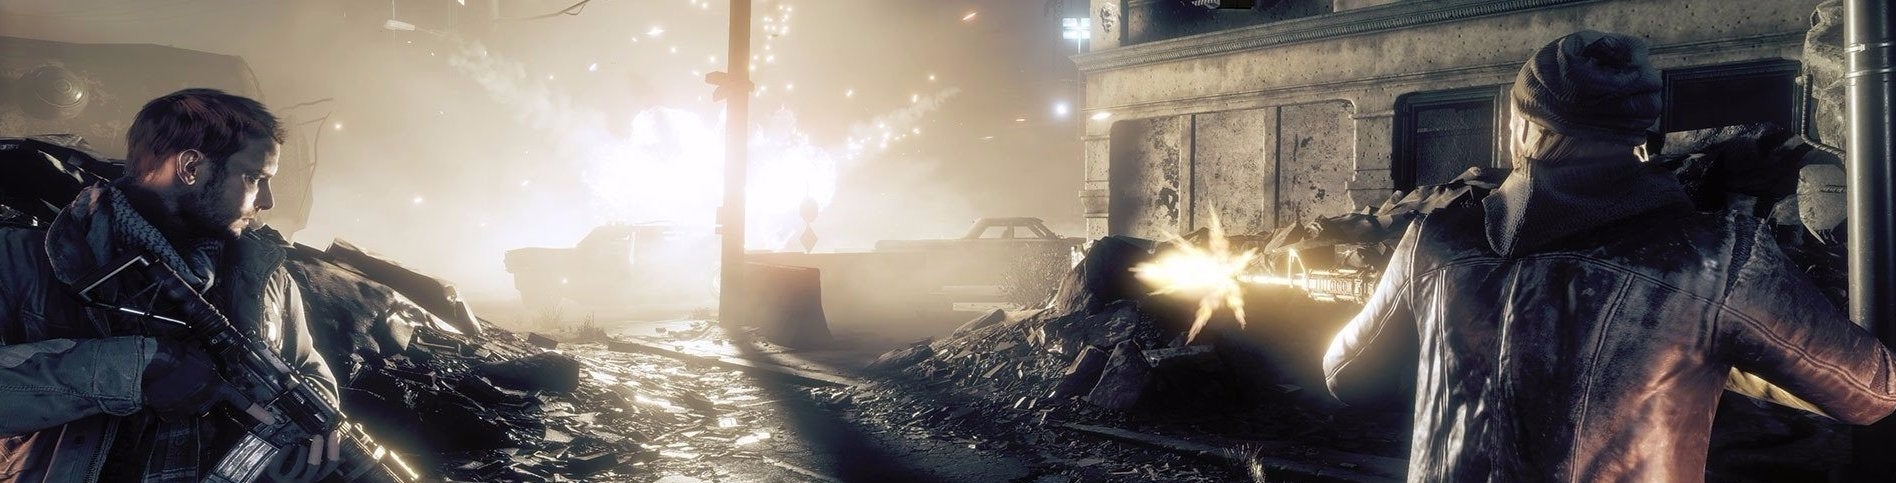 Image for Homefront: The Revolution patch finally fixes console performance